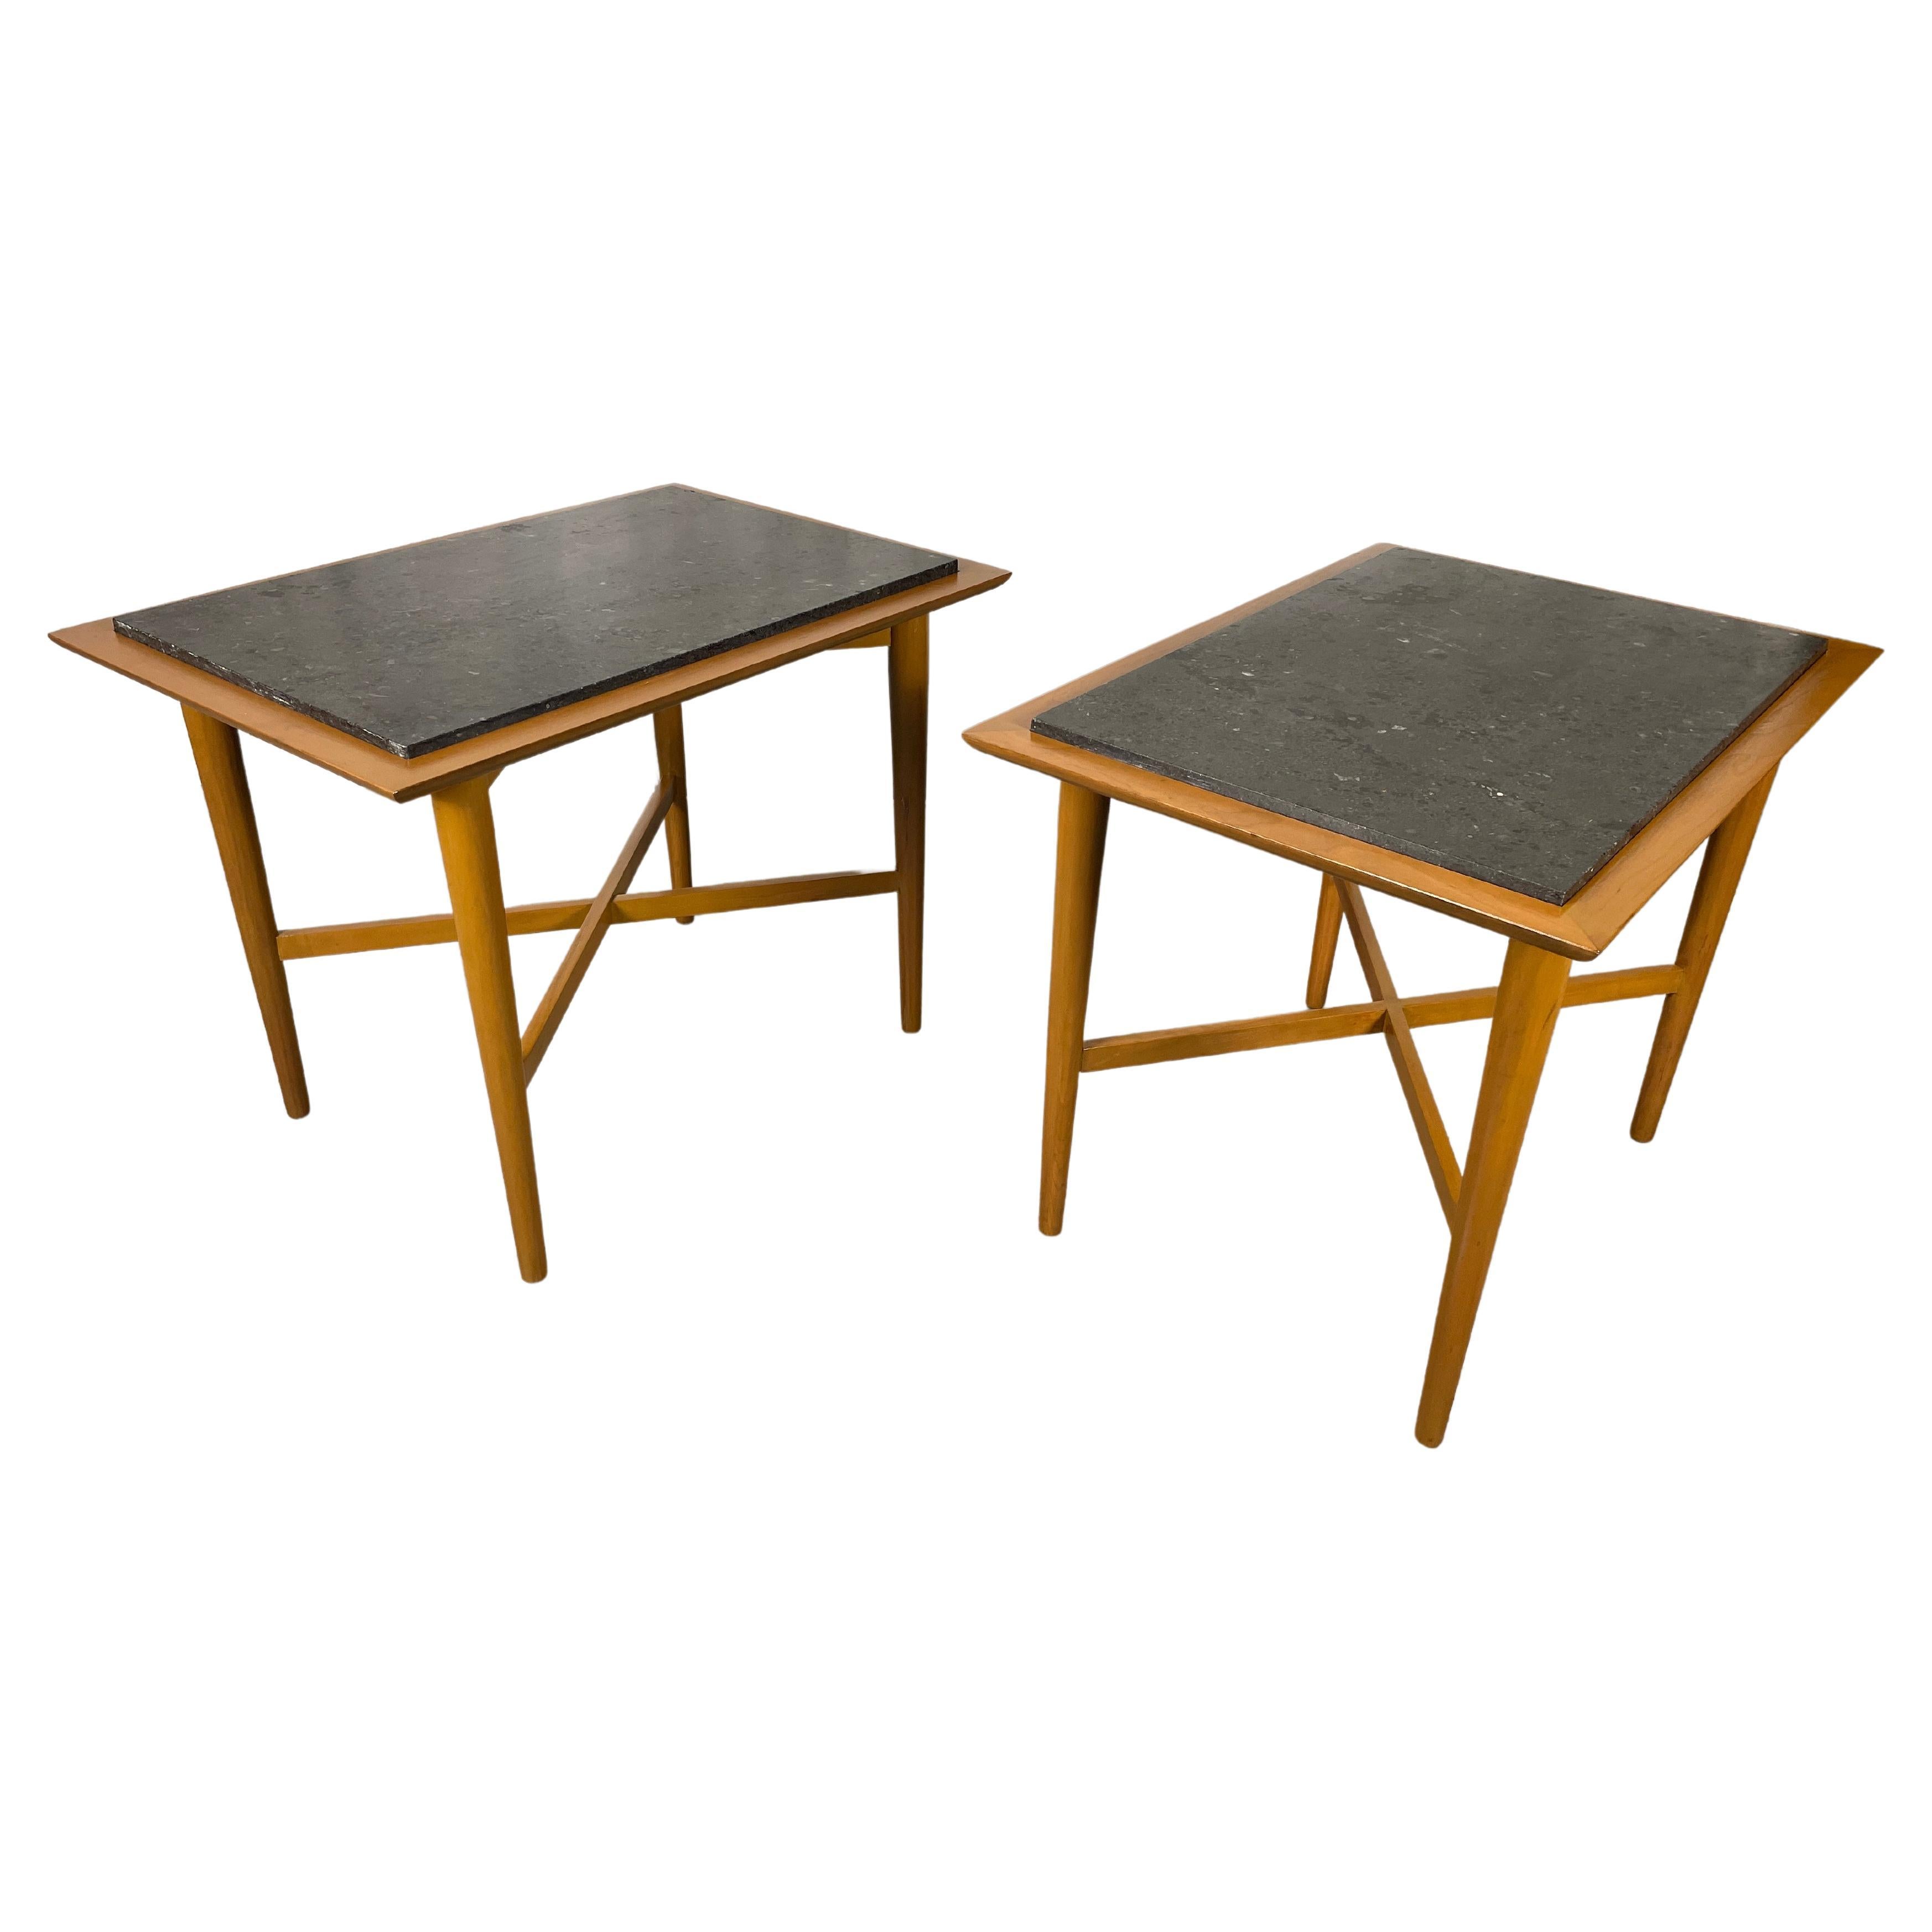 Wooden X Base Granite Top Side Tables